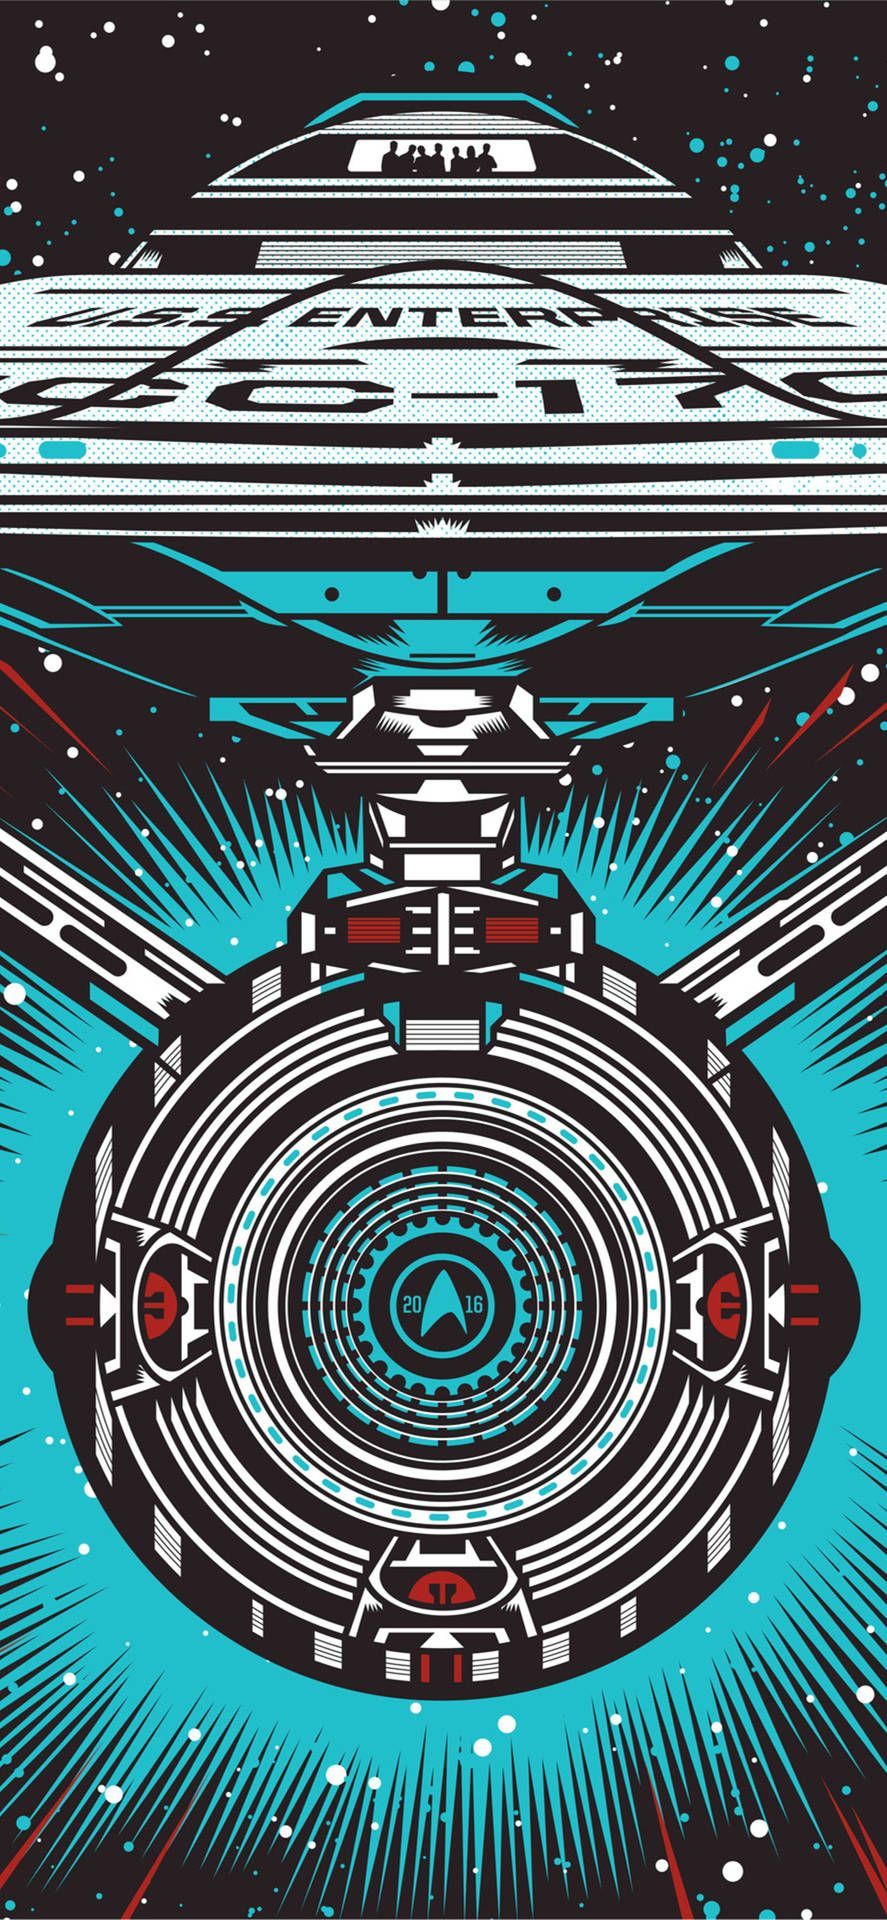 A black and blue Star Trek poster with a spaceship in the center. - Star Trek